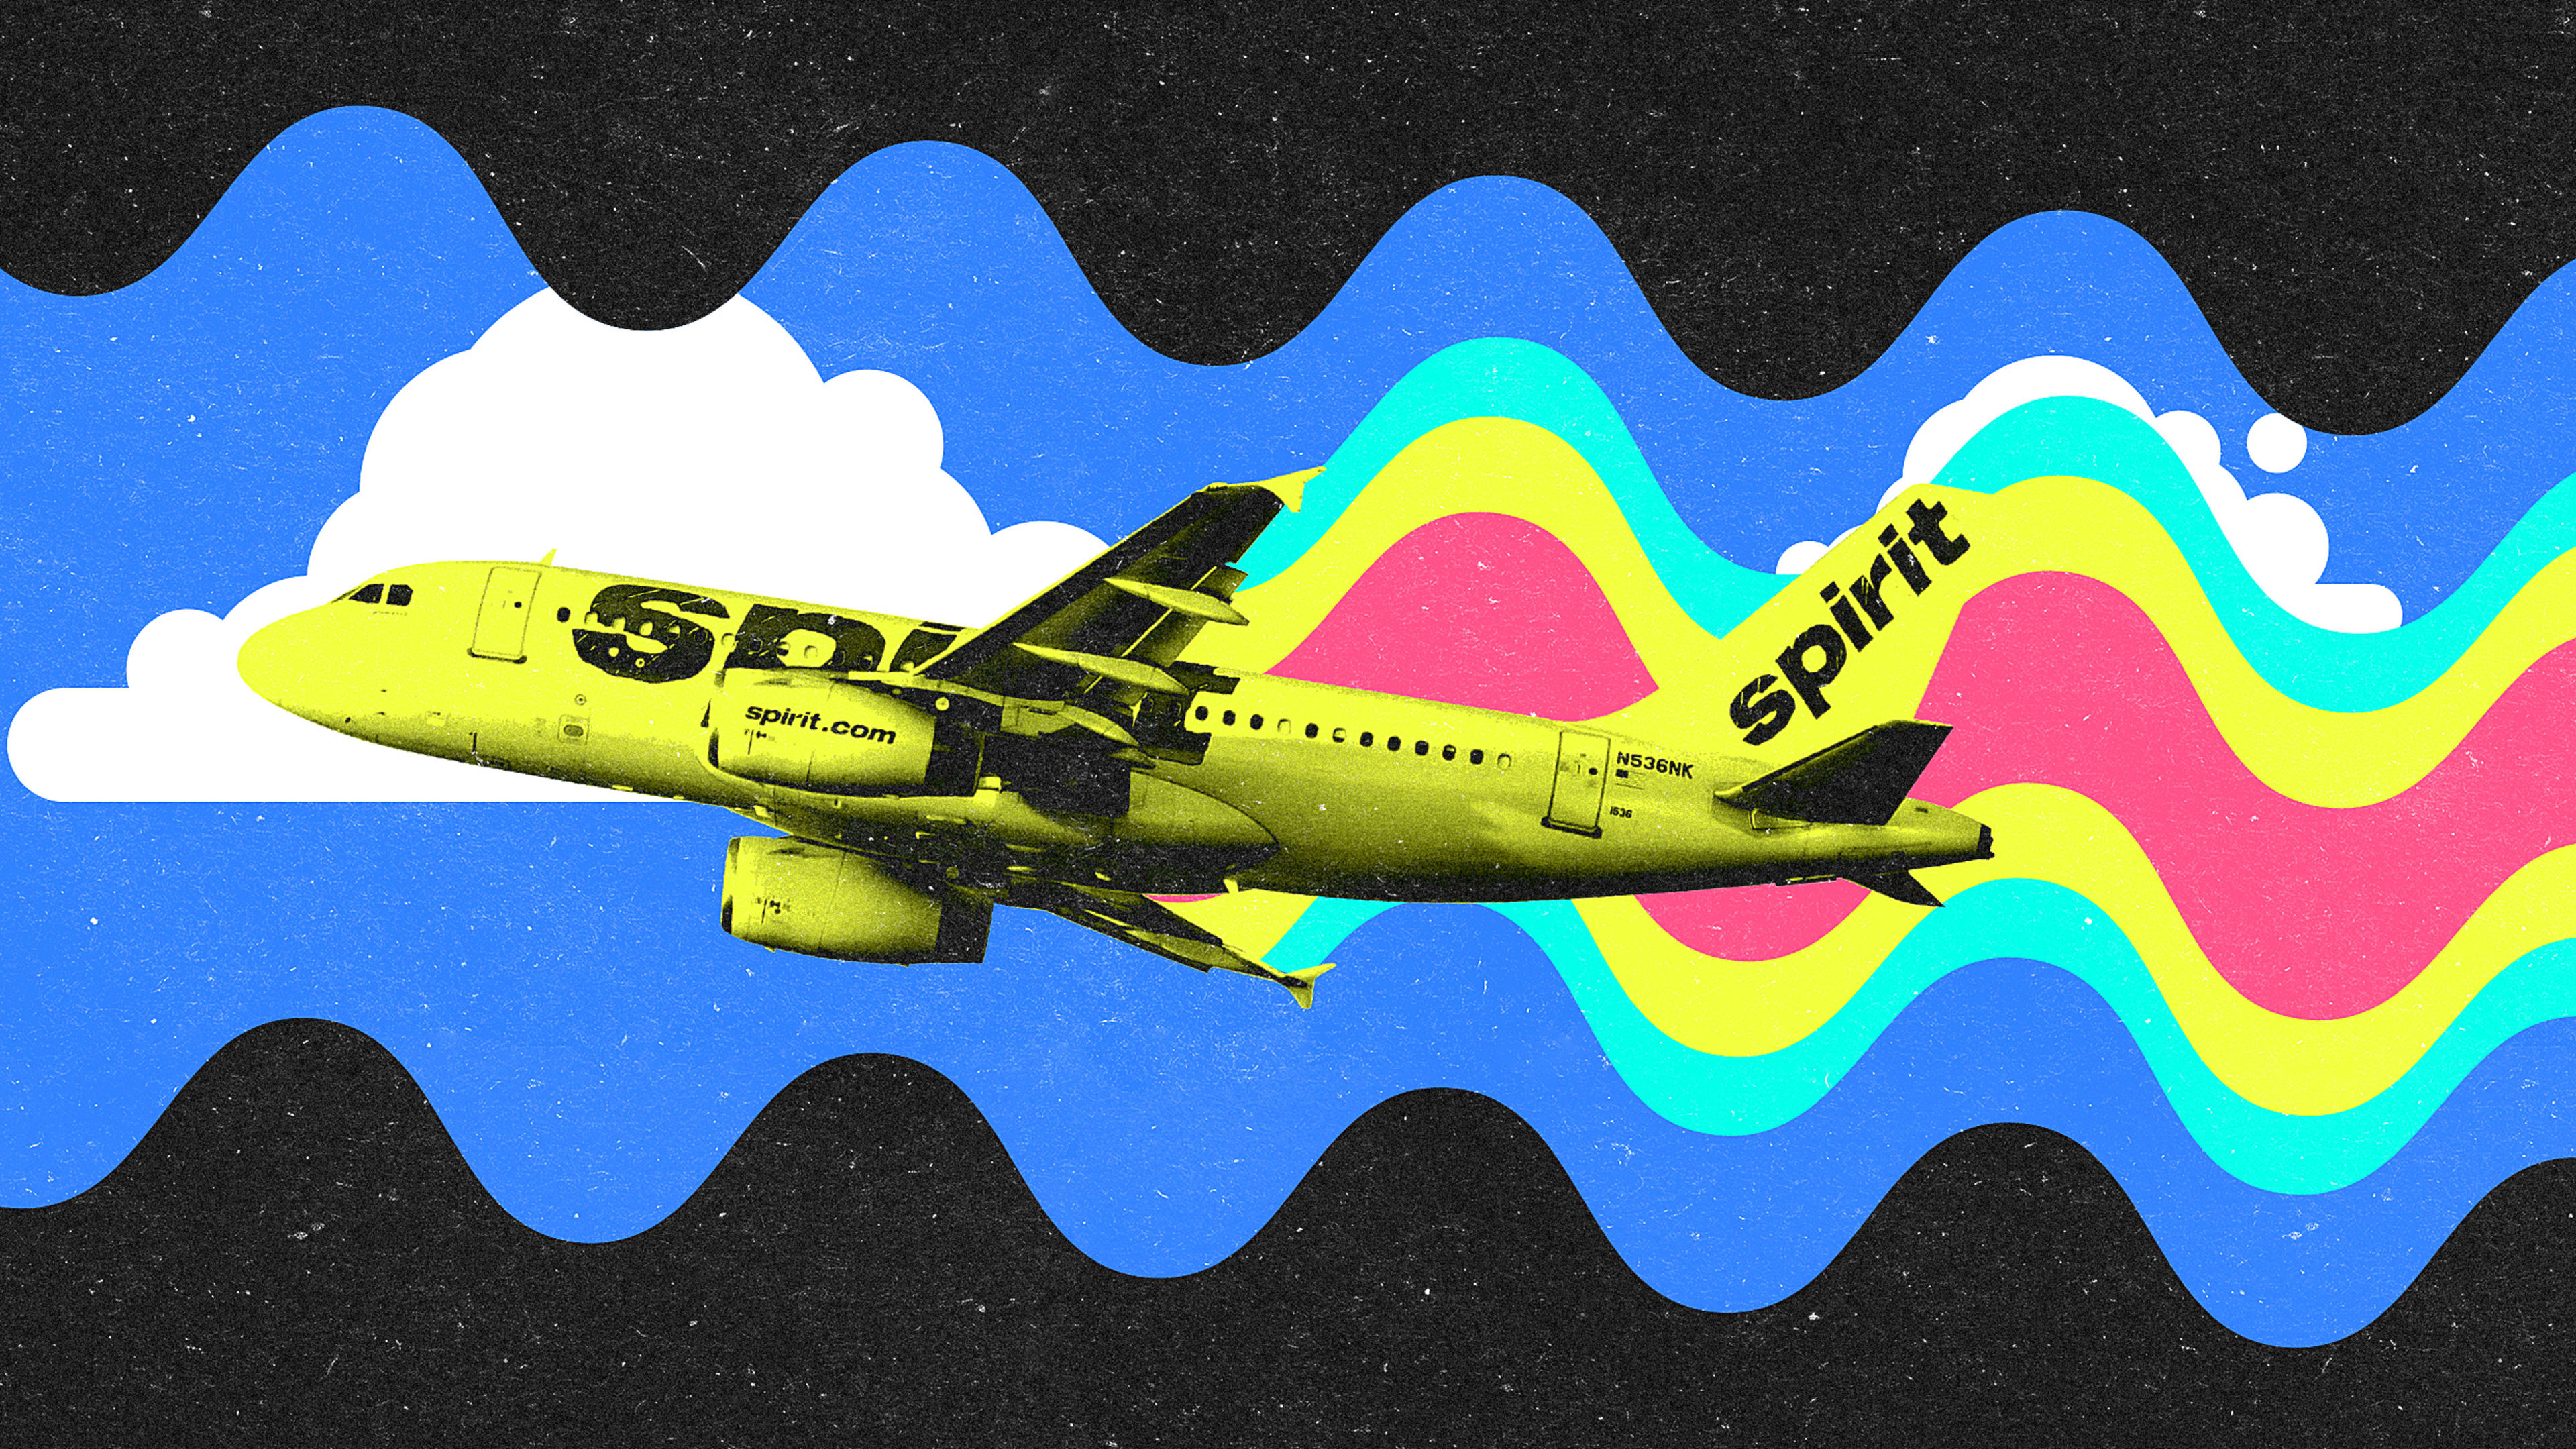 Why are the airlines fighting so hard to own Spirit, the most beat-up brand in air travel?